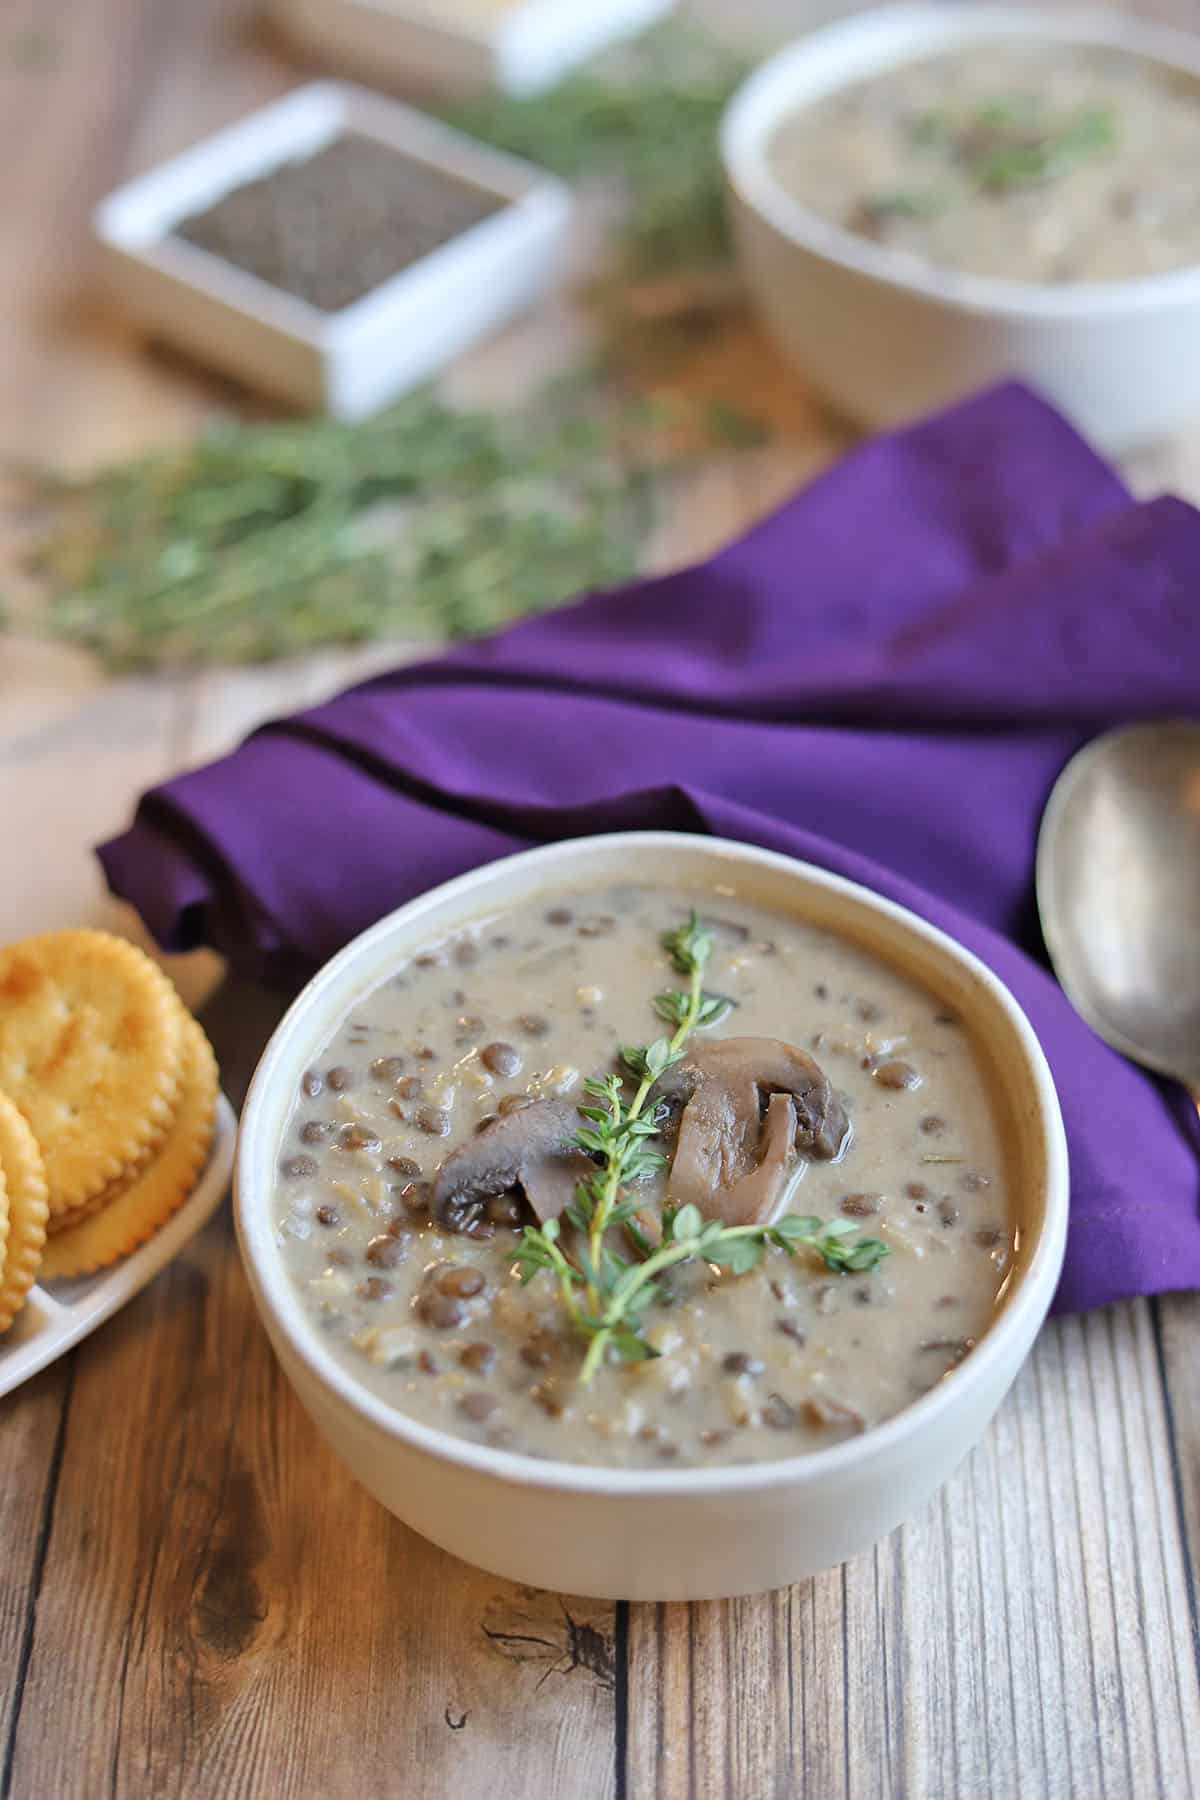 Creamy mushroom lentil soup in bowl by purple napkin and fresh thyme.